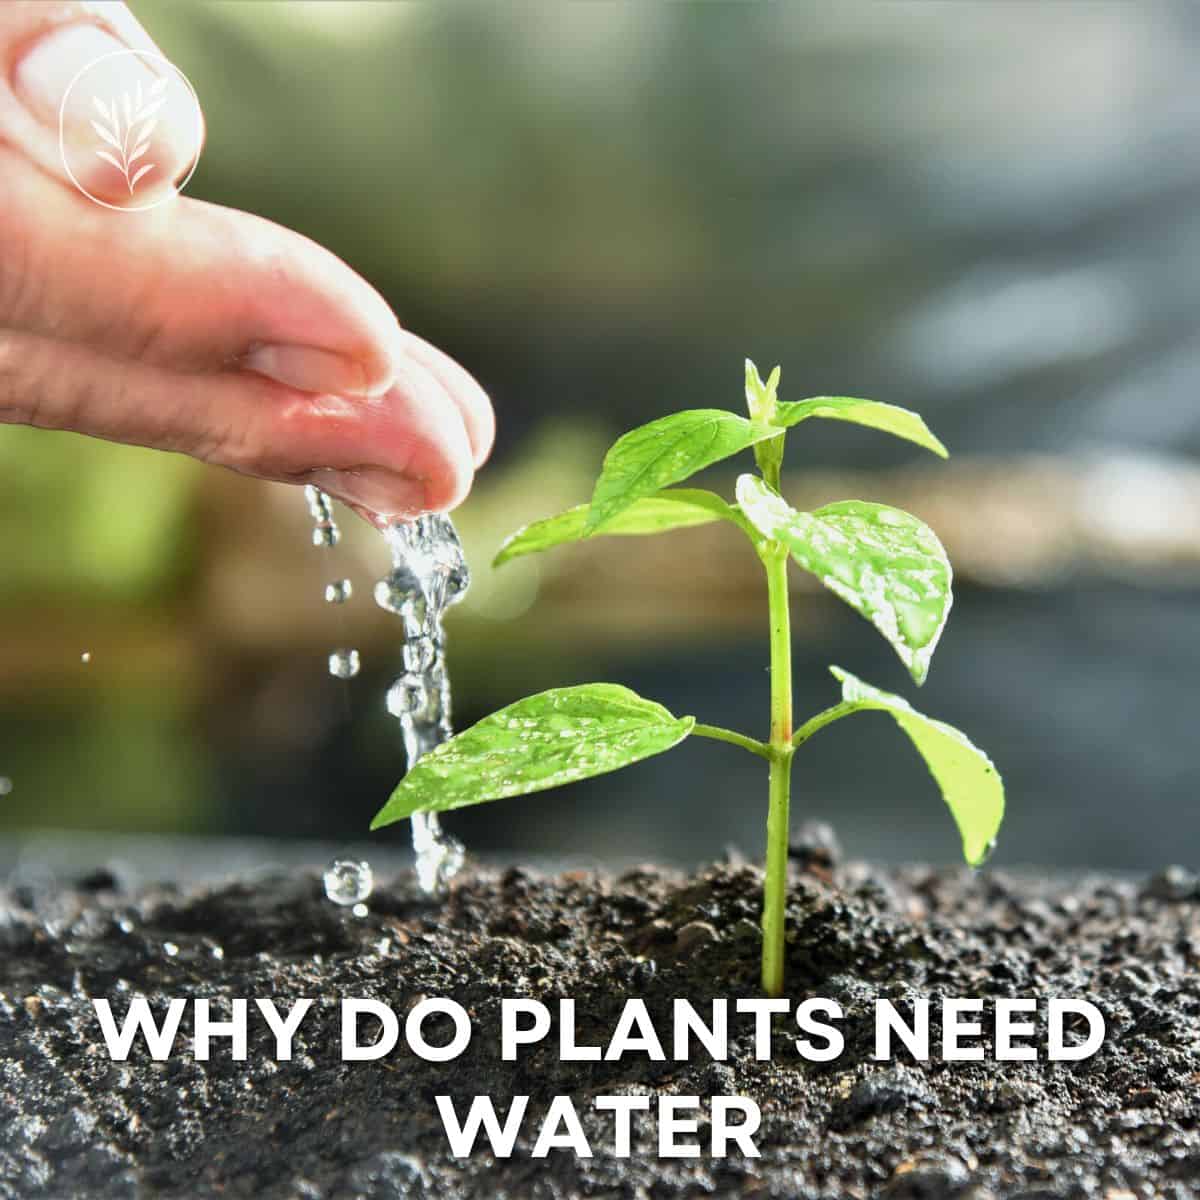 Why do plants need water via @home4theharvest